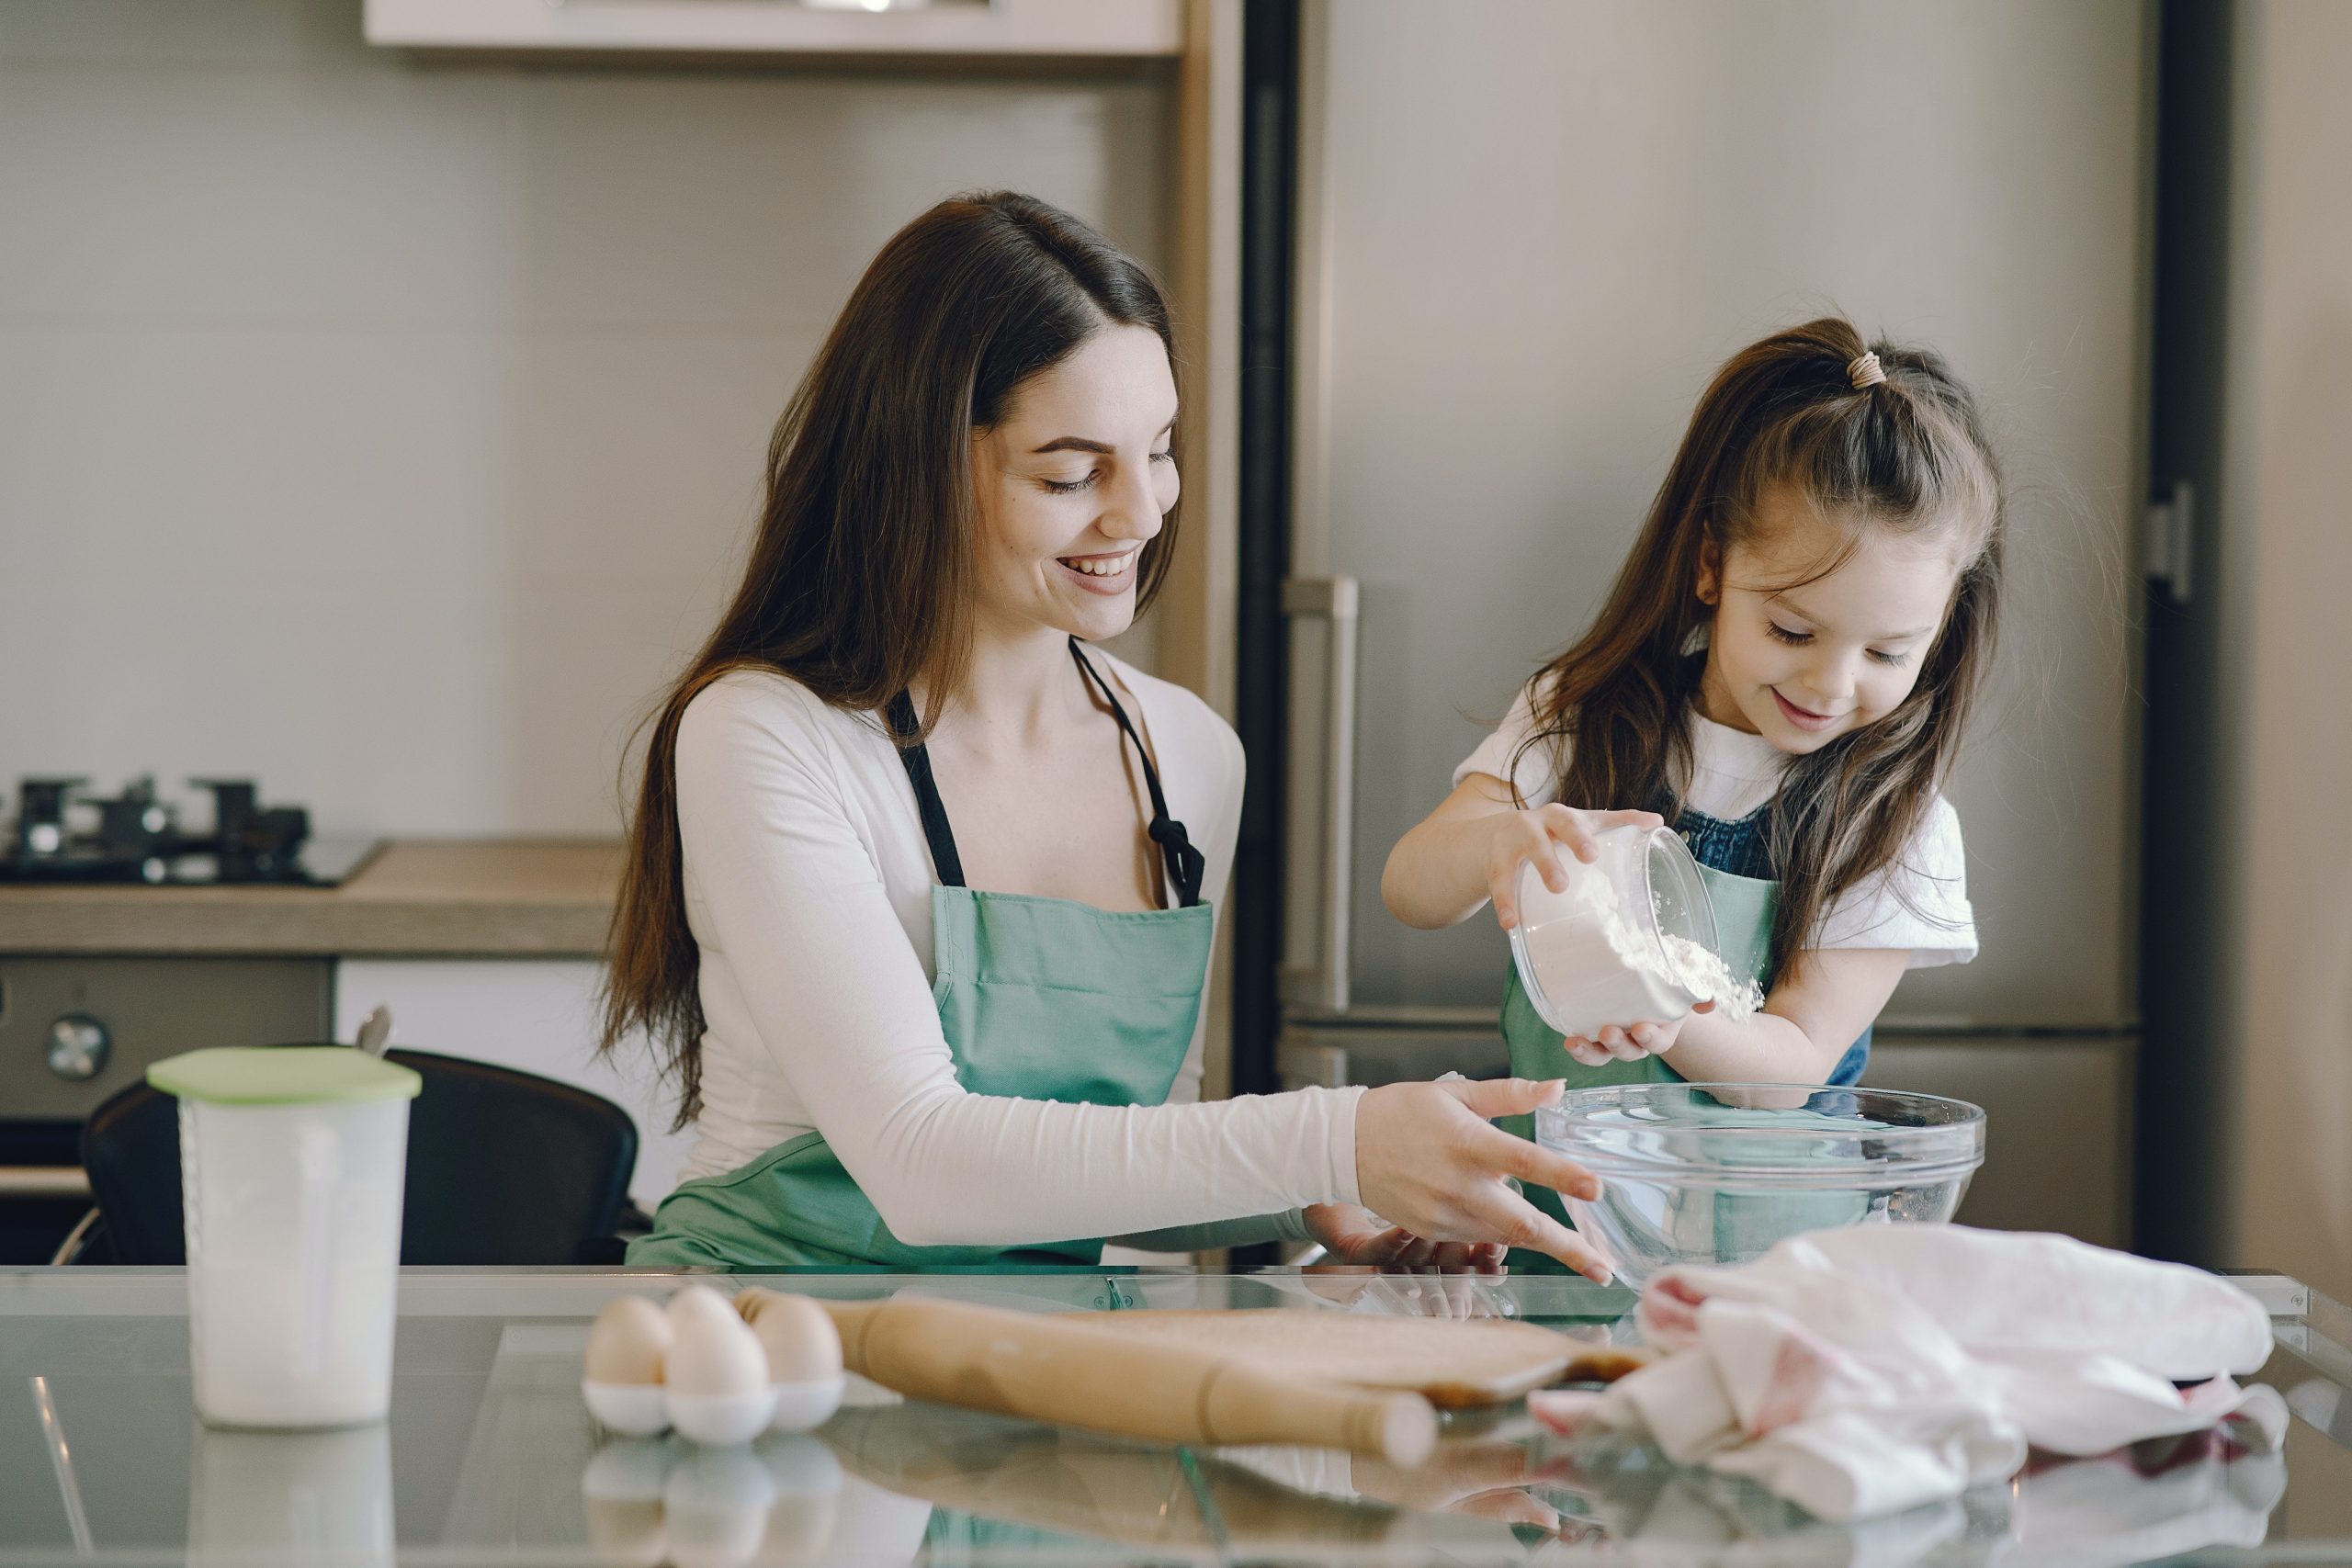 A girl is helping her mother bake a cake in the kitchen